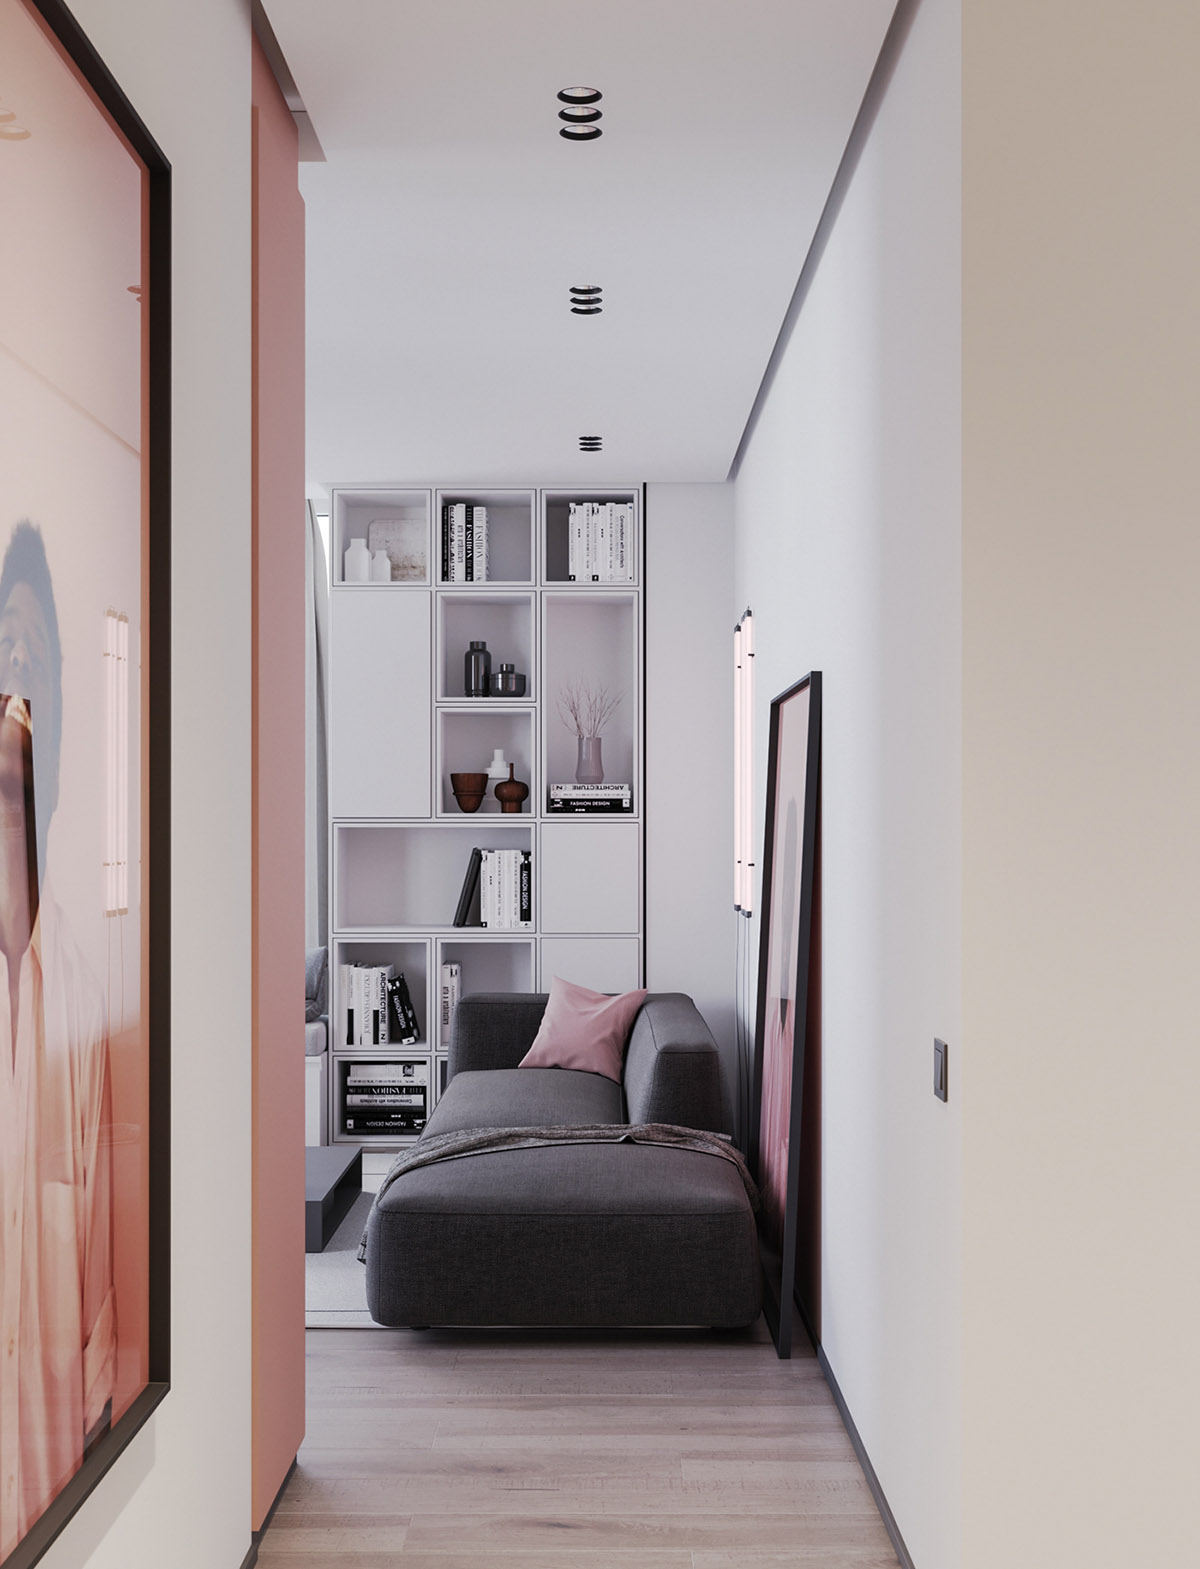 The use of pink in interior design